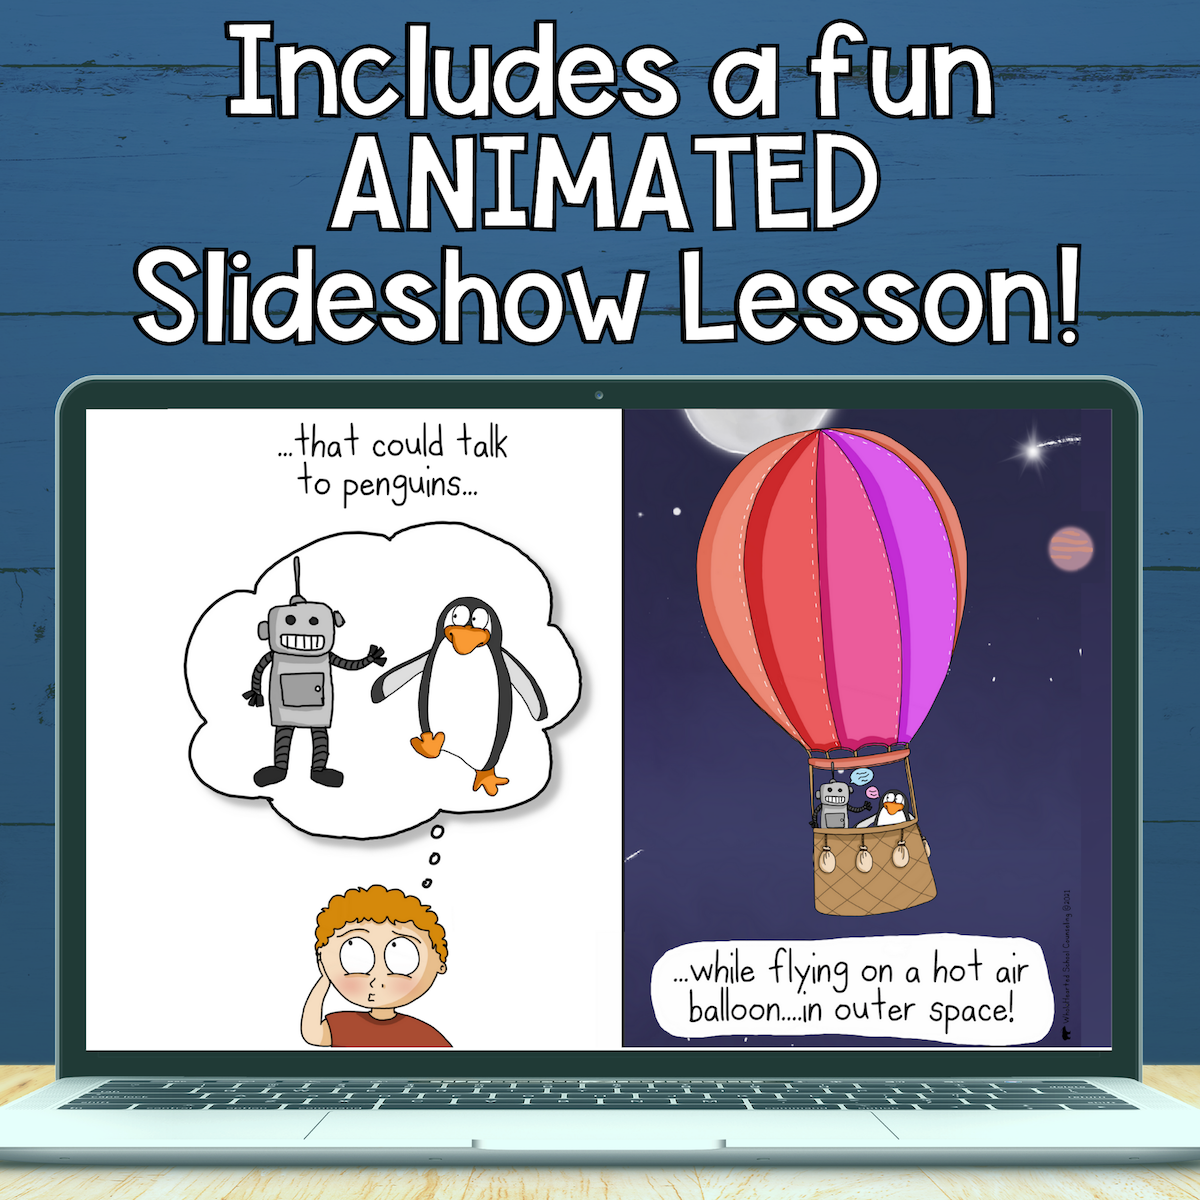 Slideshow lesson that teaches kids how to focus and have self-control